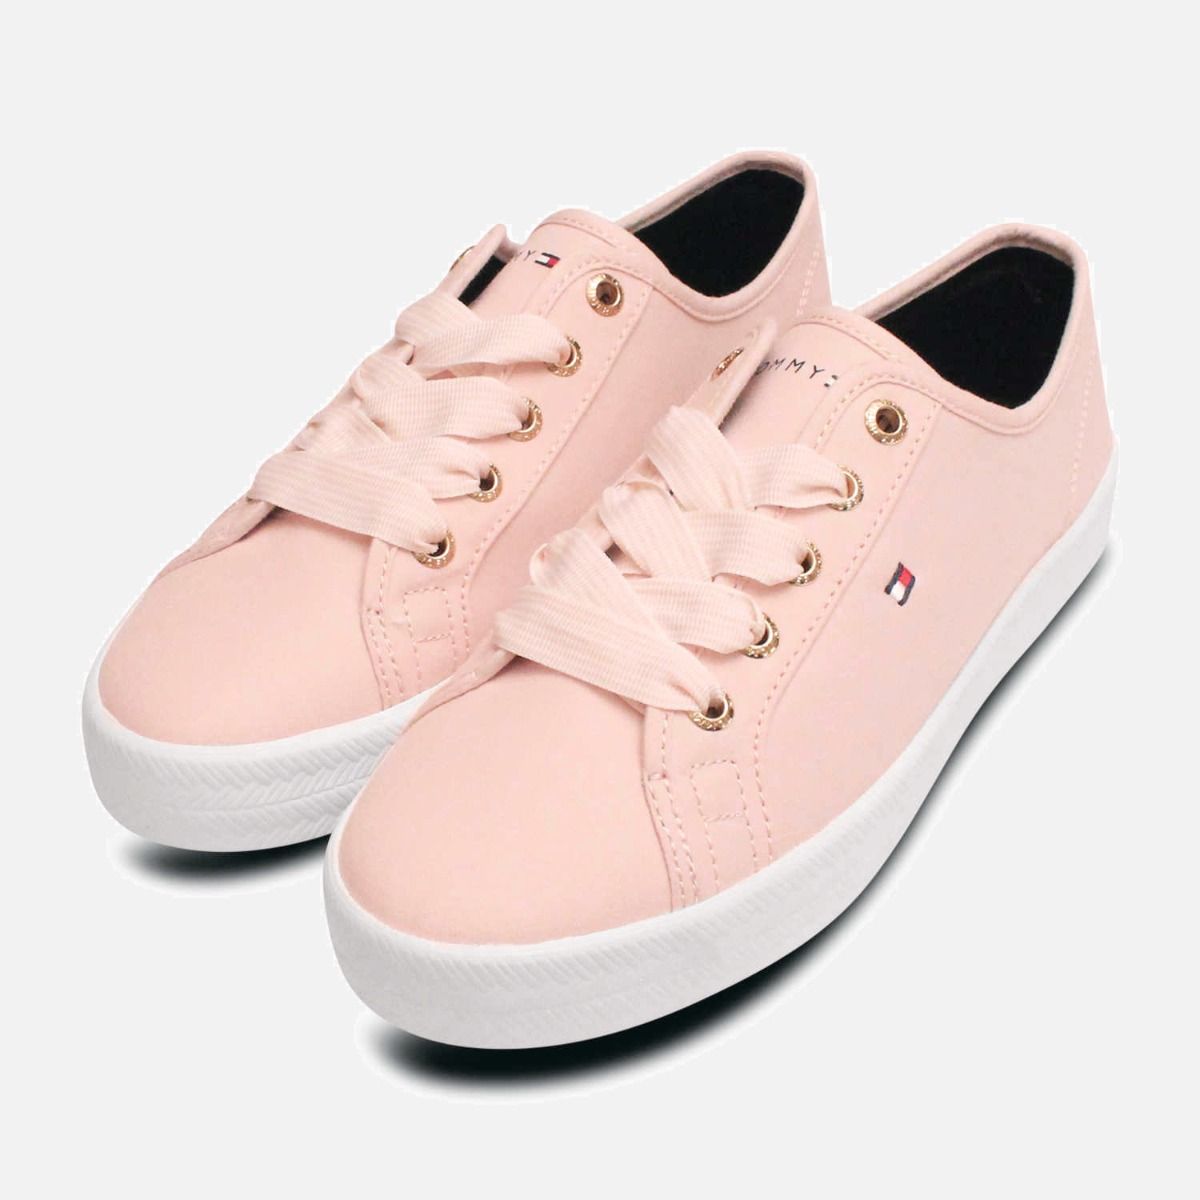 Tommy Hilfiger Pale Pink Nautical Style 